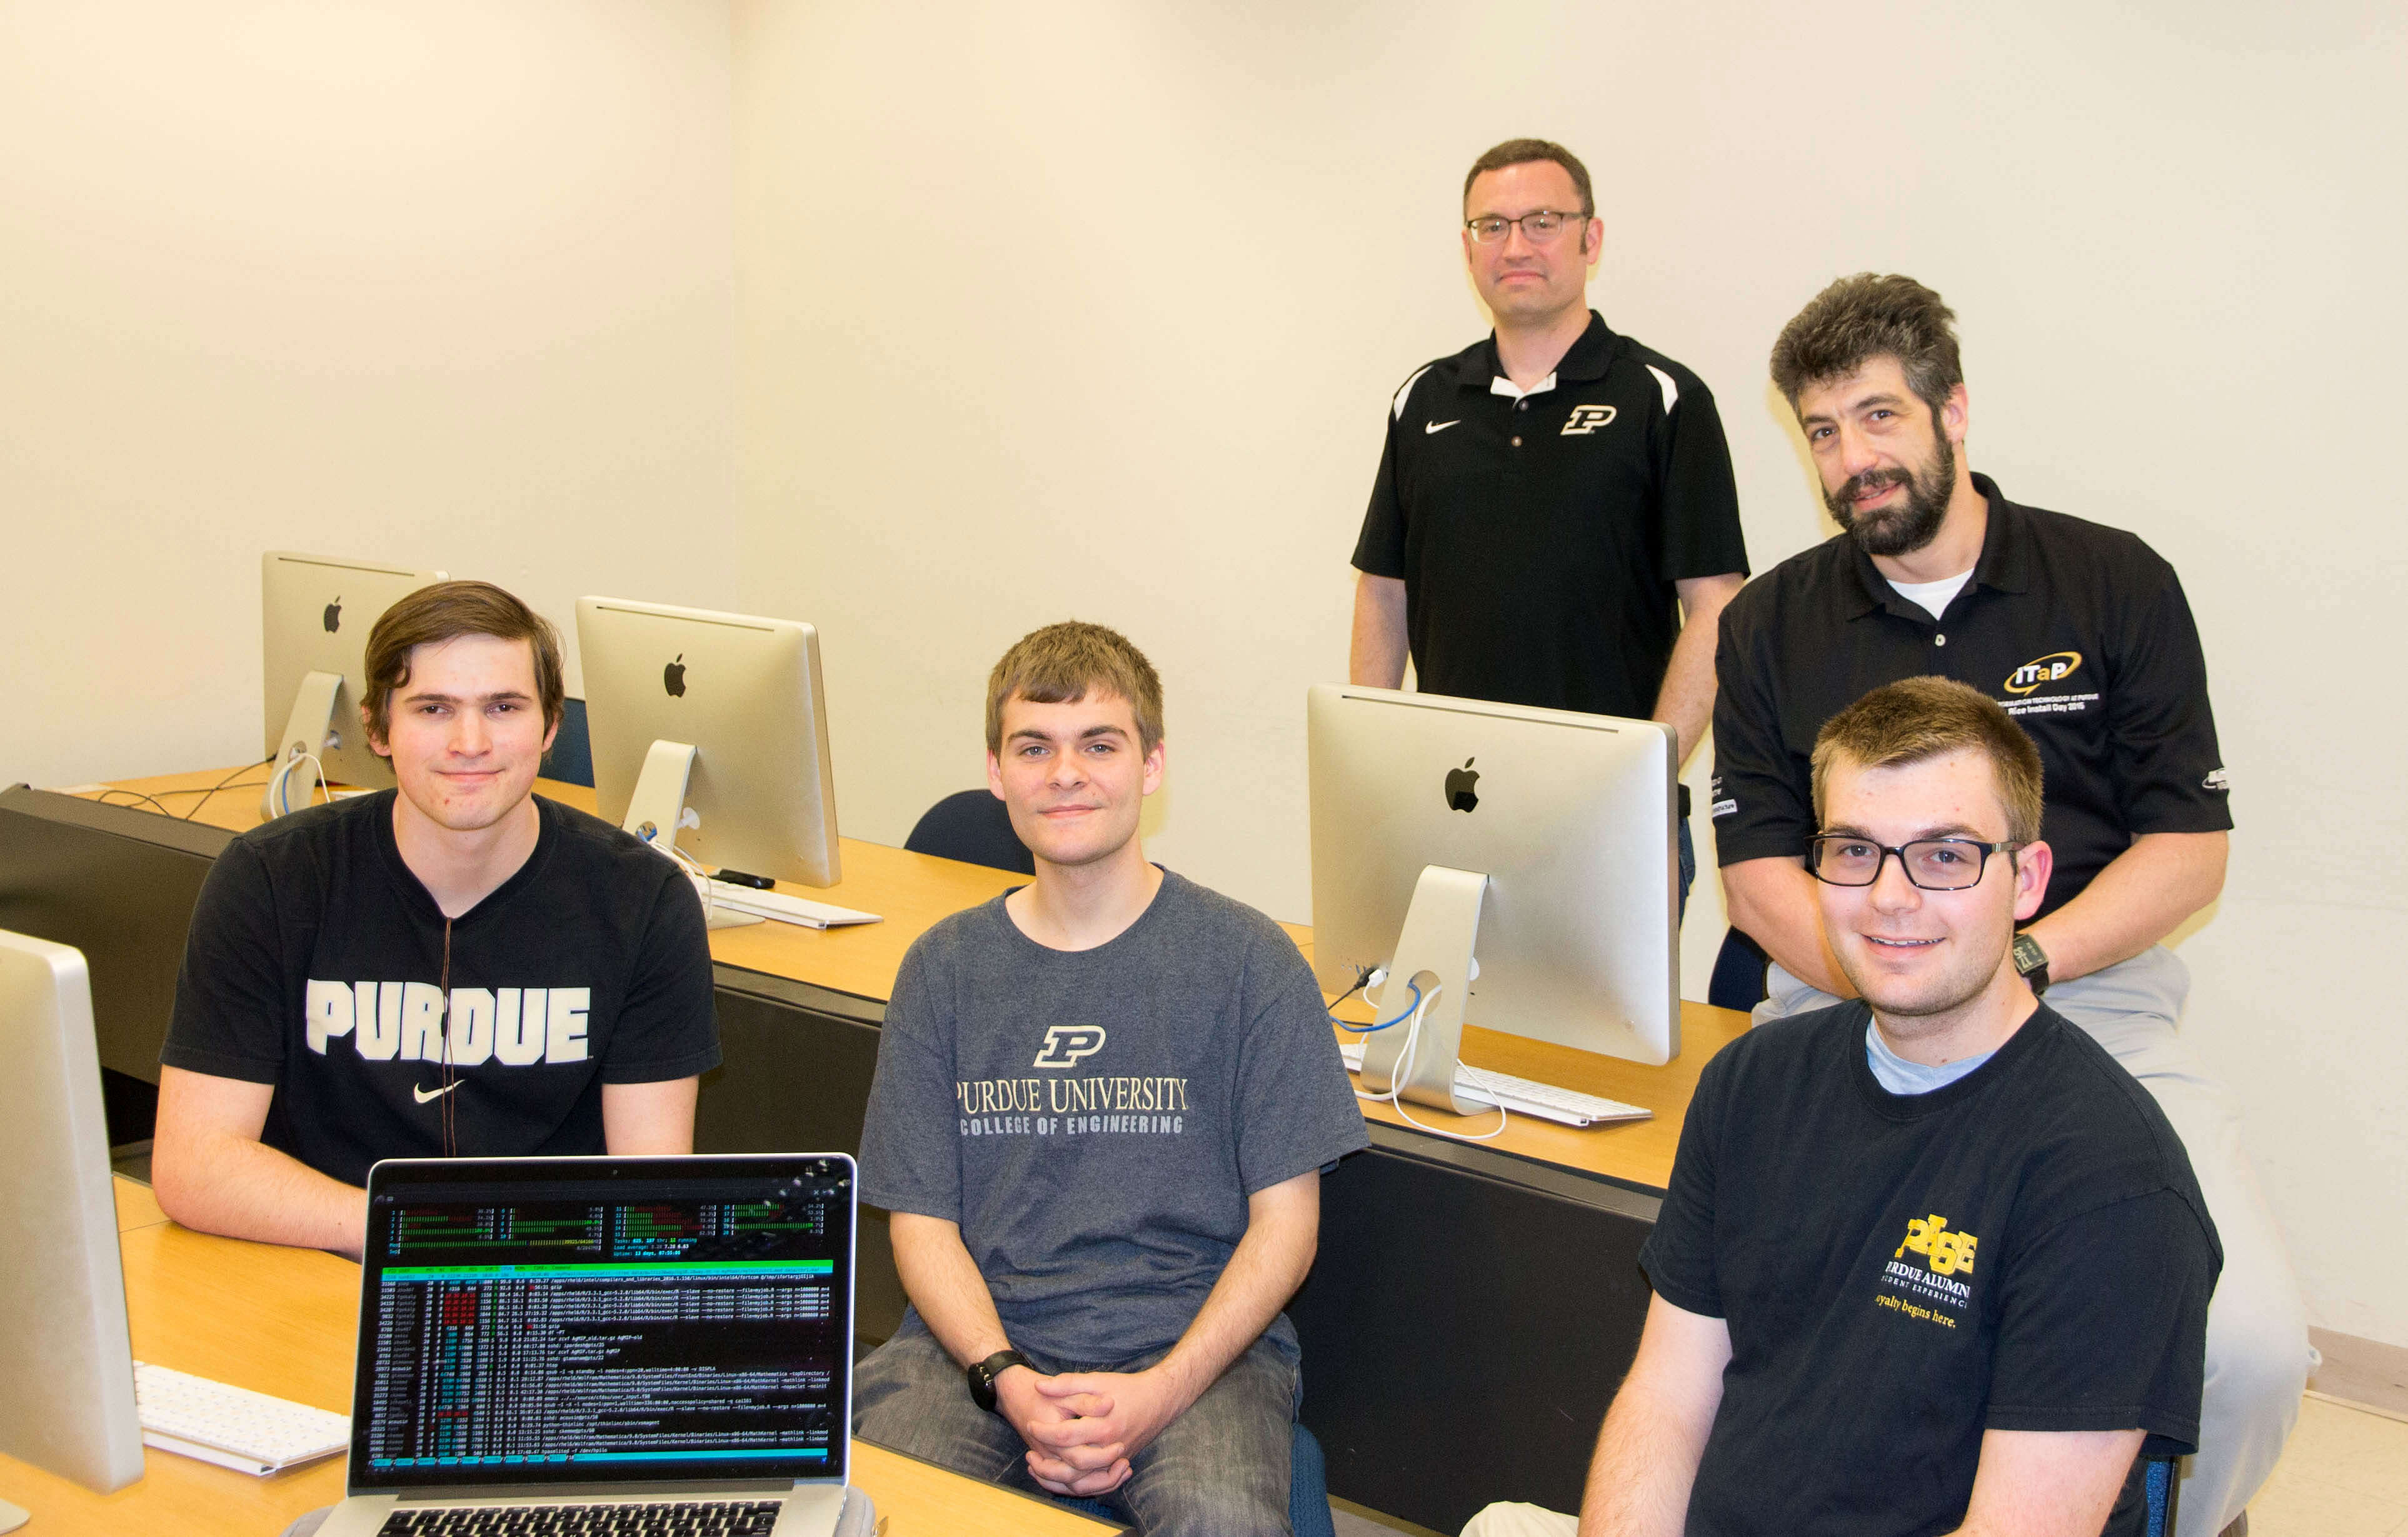 Team of Purdue, students Conference Purdue Northeastern Supercomputing to compete at International - University News